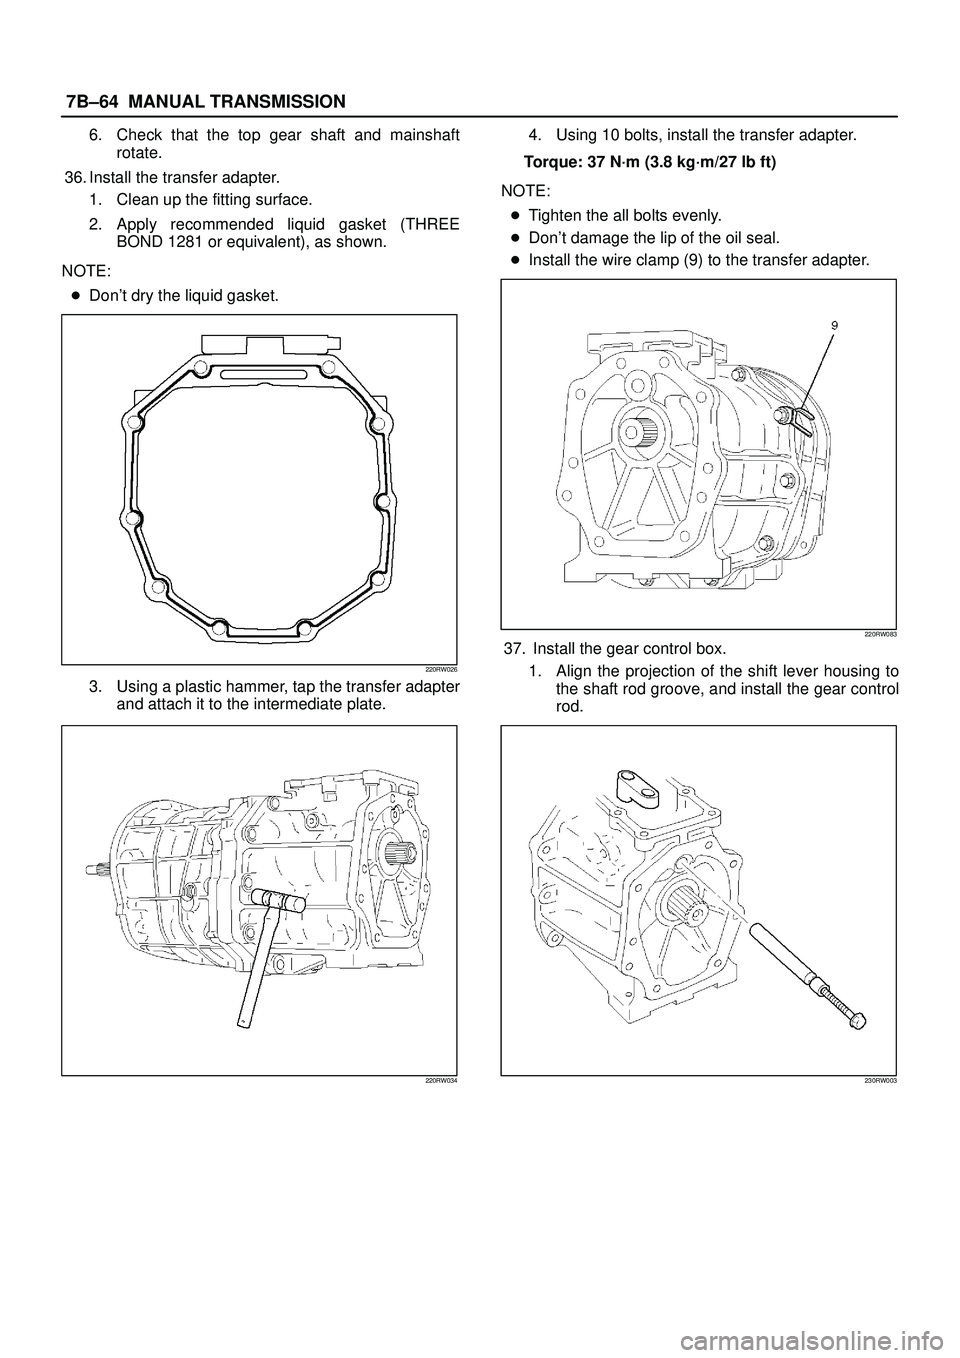 ISUZU TROOPER 1998  Service Owners Manual 7B±64MANUAL TRANSMISSION
6. Check that the top gear shaft and mainshaft
rotate.
36. Install the transfer adapter.
1. Clean up the fitting surface.
2. Apply recommended liquid gasket (THREE
BOND 1281 